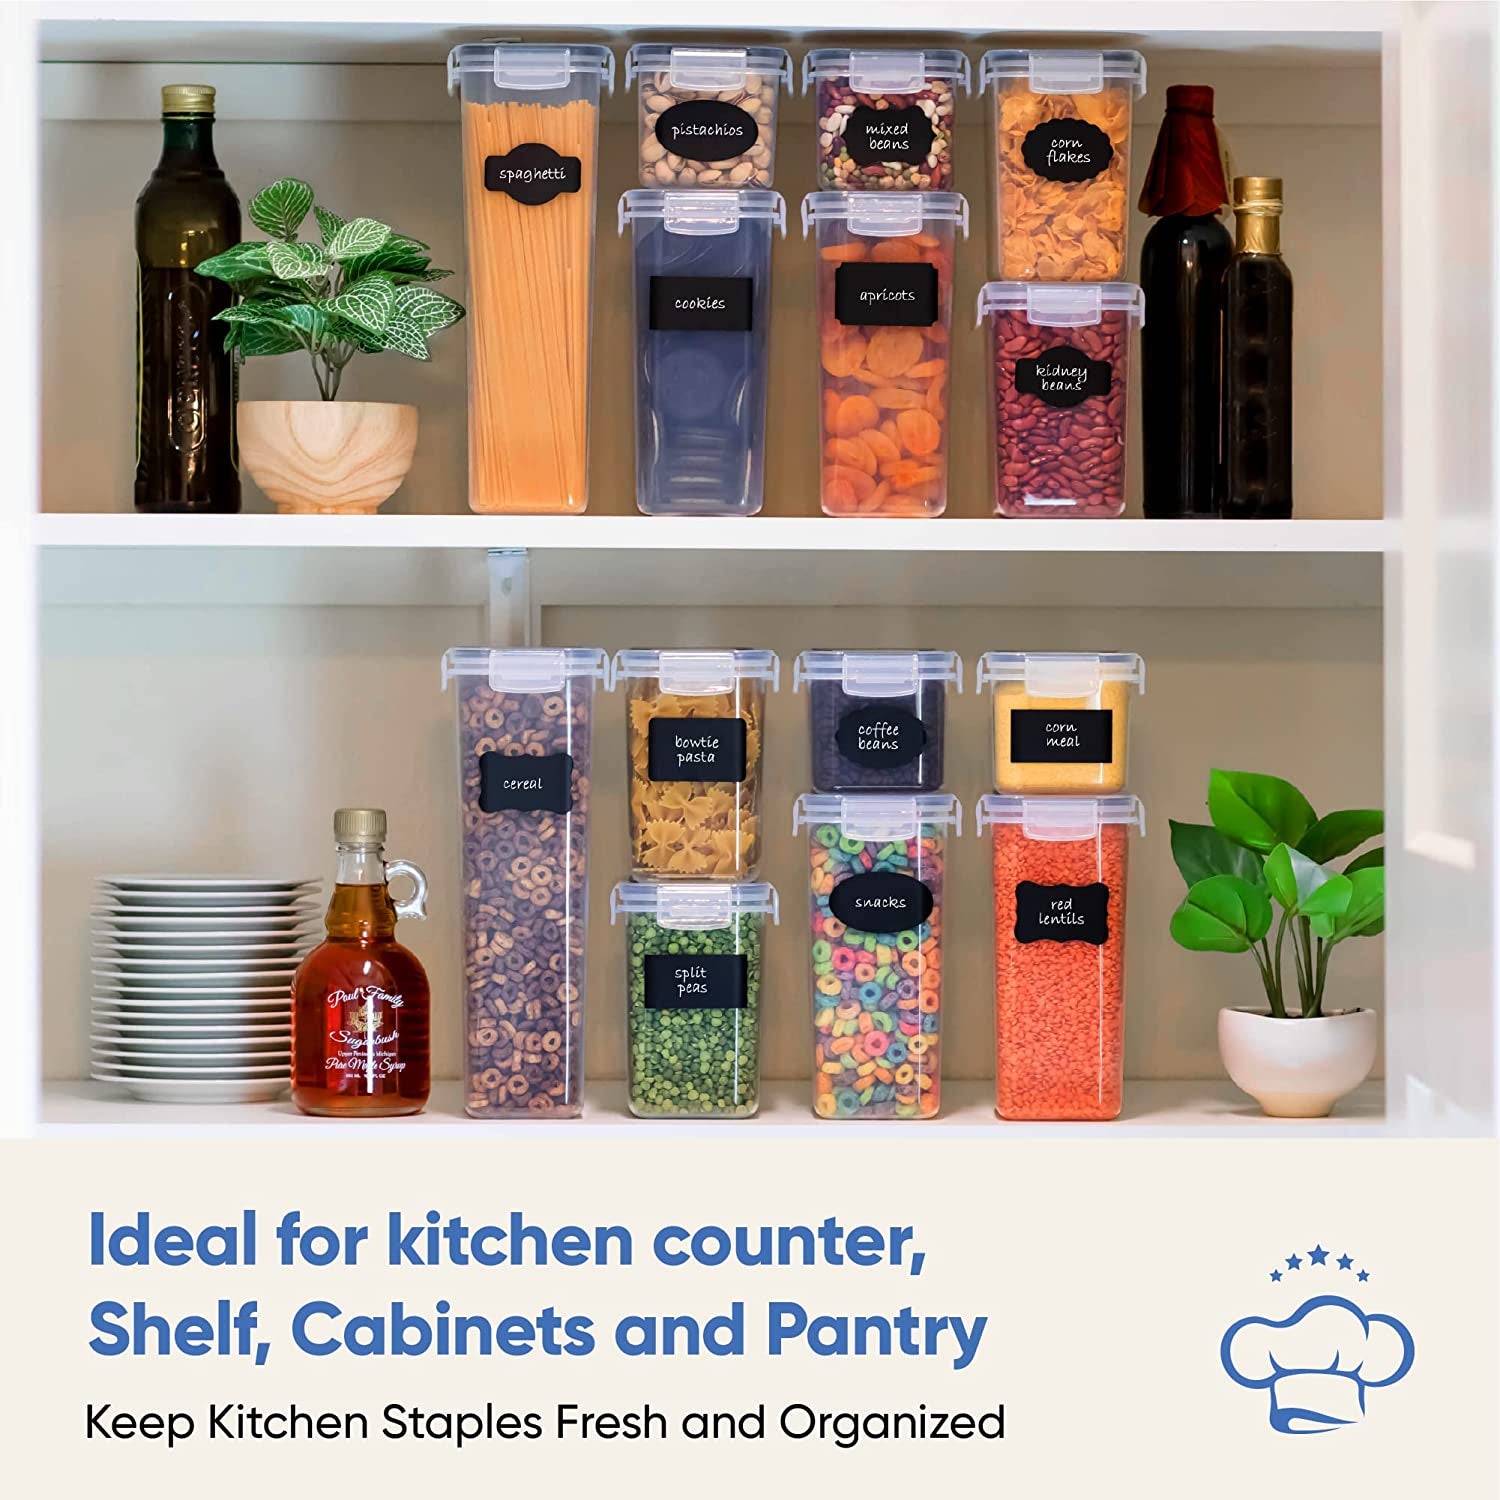 Airtight Food Storage Containers - Everyday-Sales.com